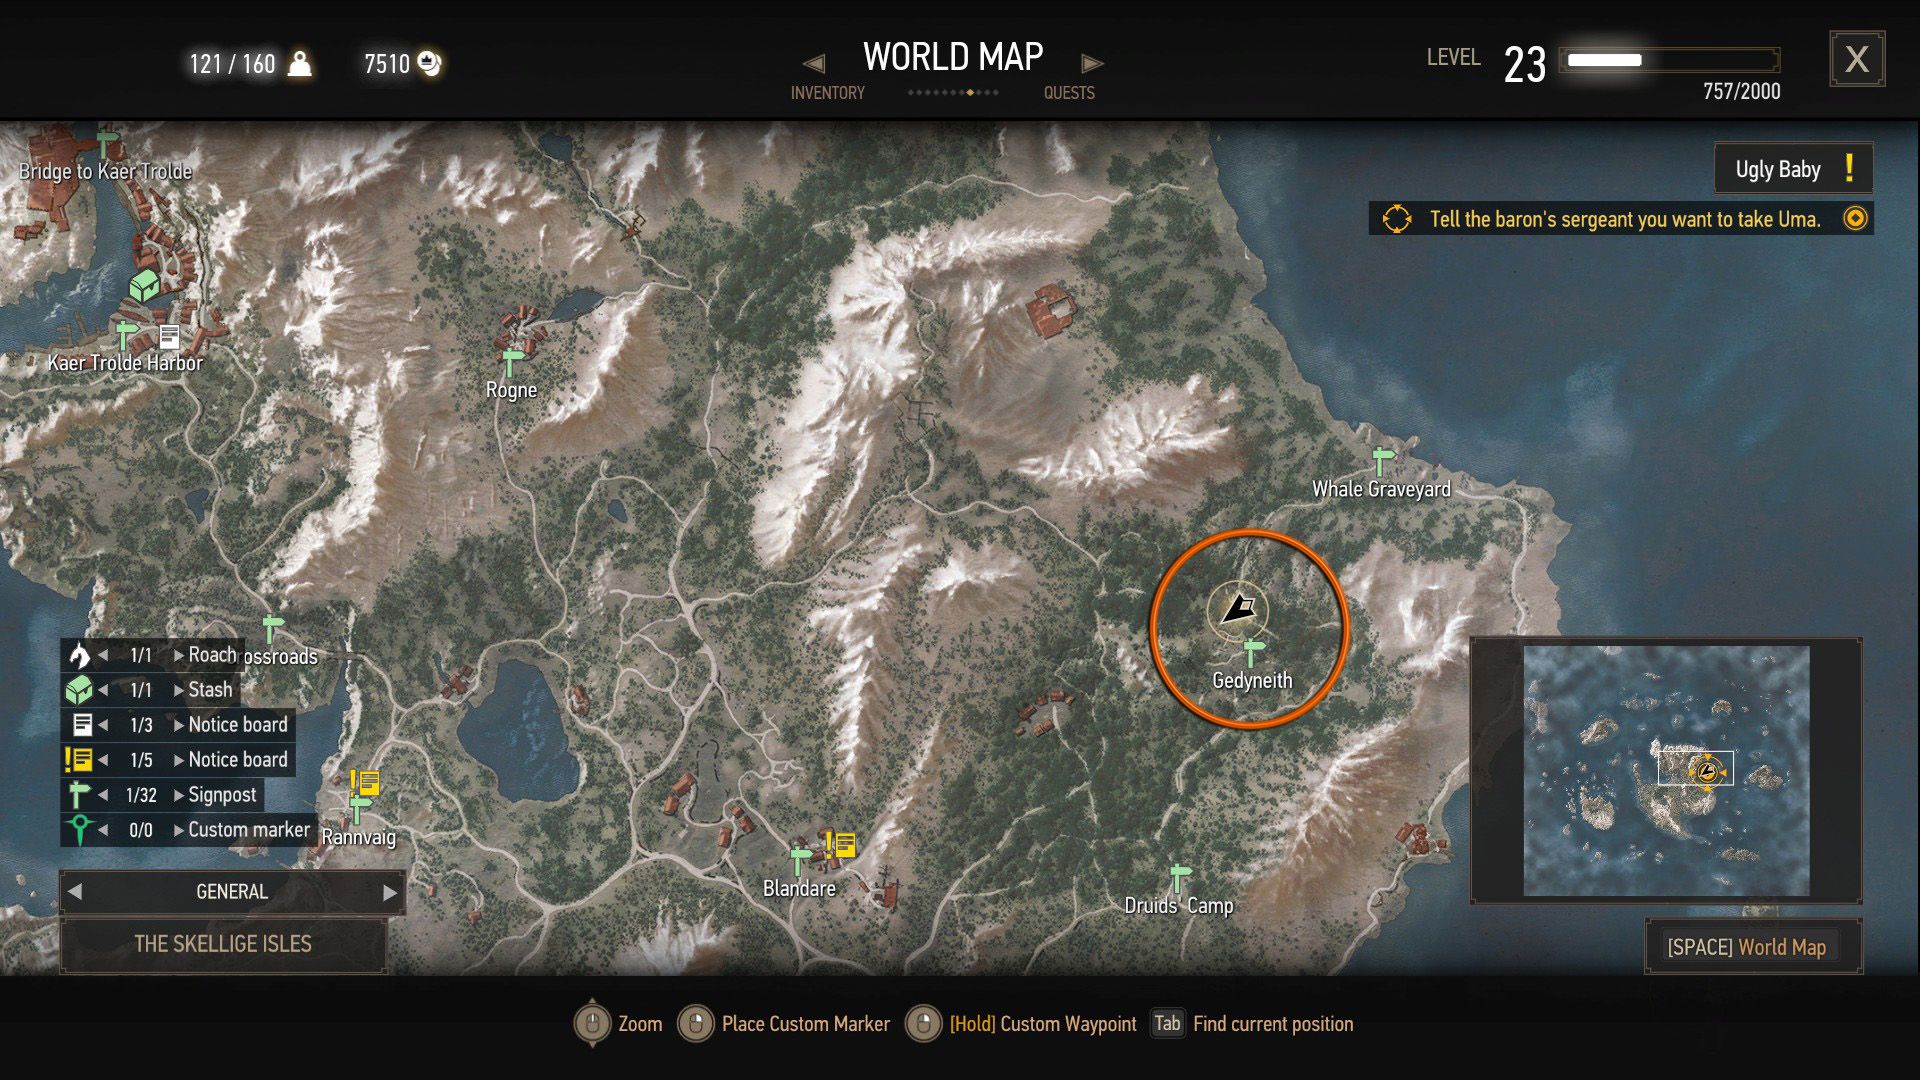 A screenshot of the map from The Witcher 3 showing an orange circle over the quest location.